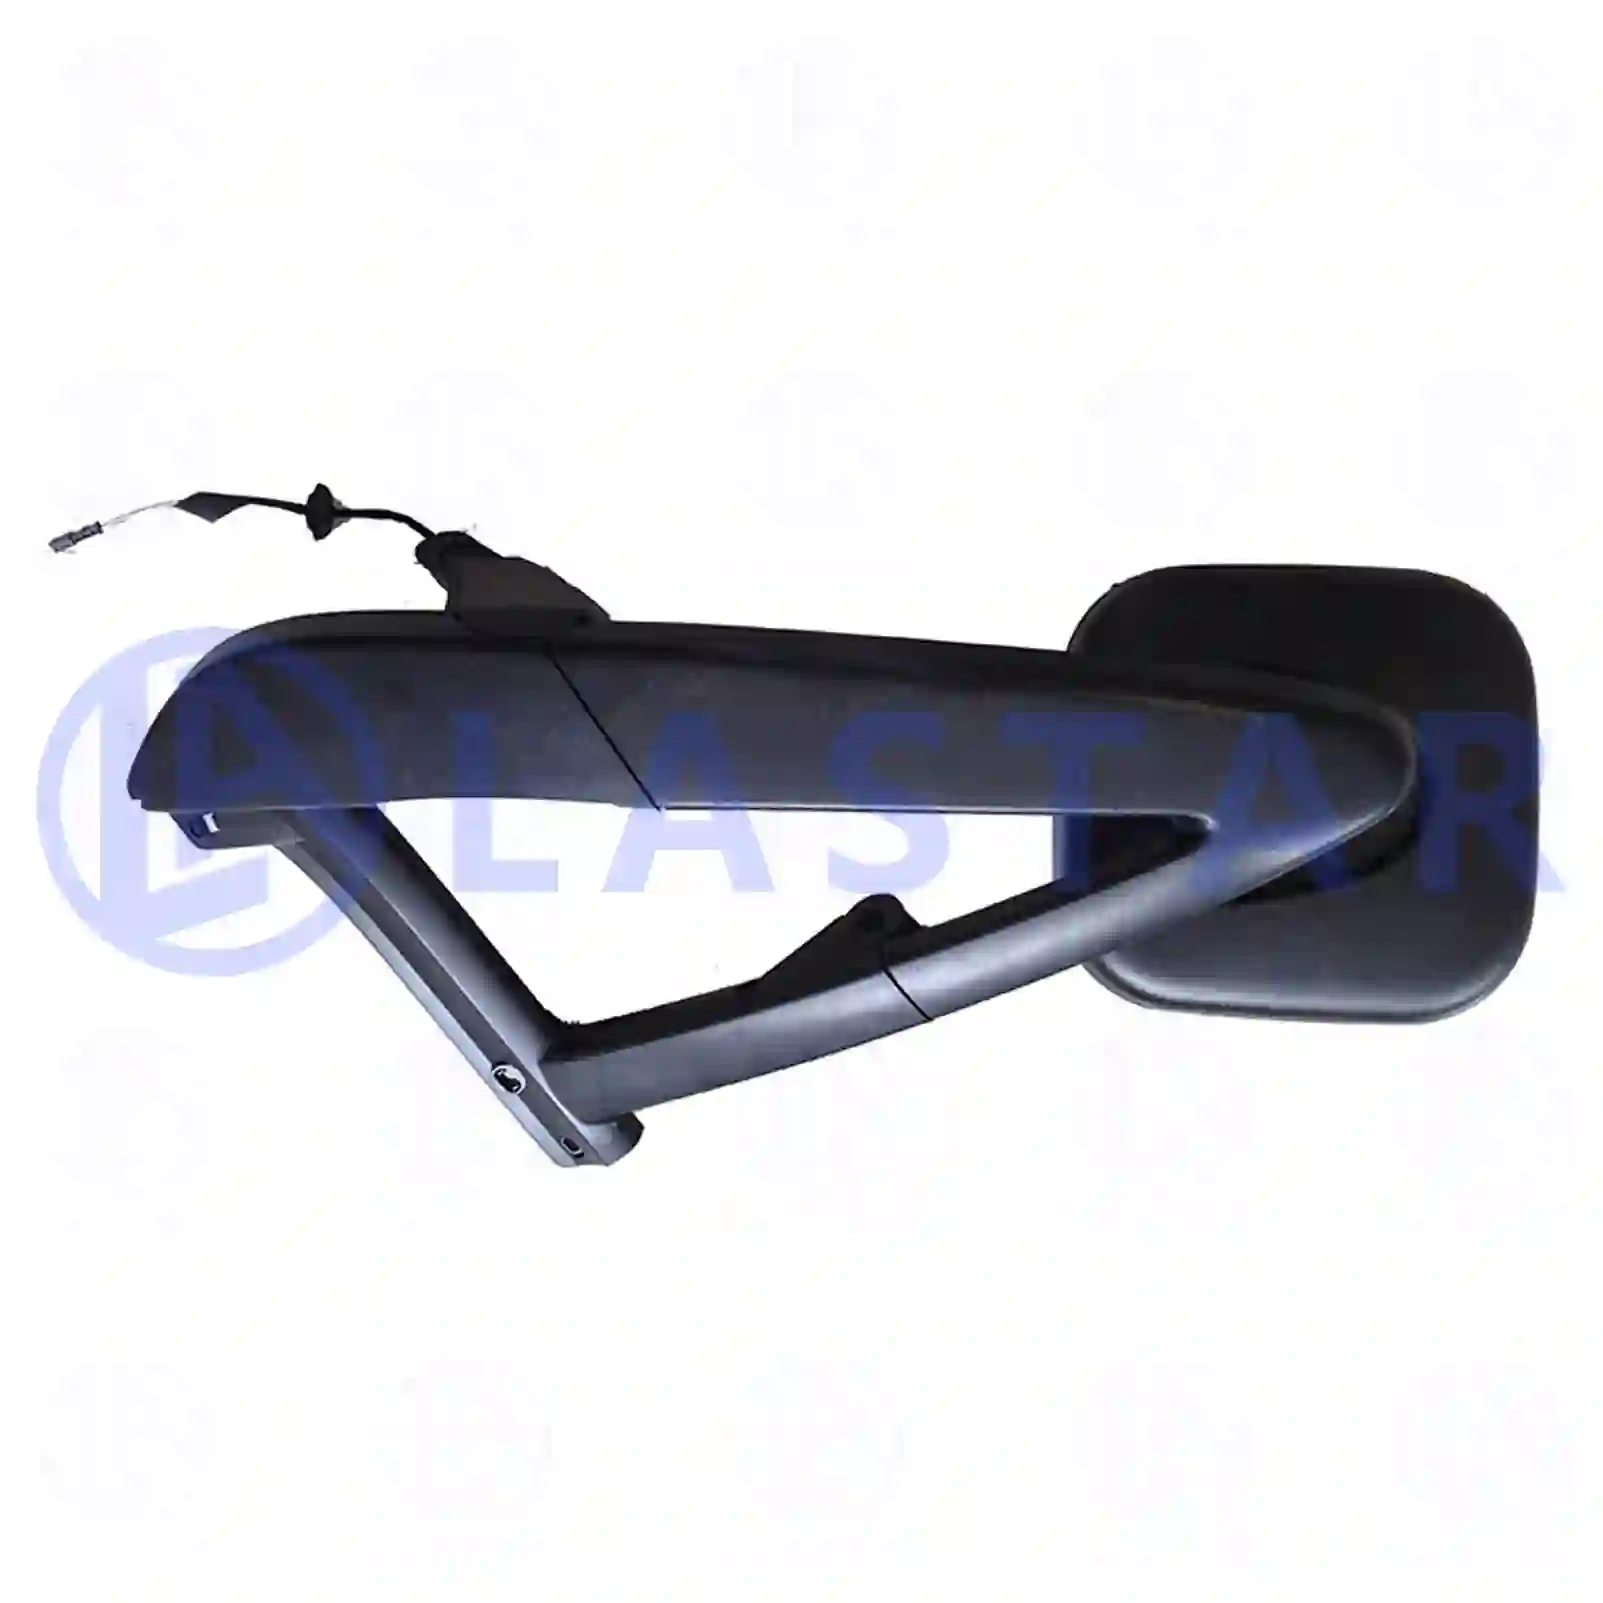 Front mirror, with cover, 77719445, 0028103116, 9408107316, ||  77719445 Lastar Spare Part | Truck Spare Parts, Auotomotive Spare Parts Front mirror, with cover, 77719445, 0028103116, 9408107316, ||  77719445 Lastar Spare Part | Truck Spare Parts, Auotomotive Spare Parts